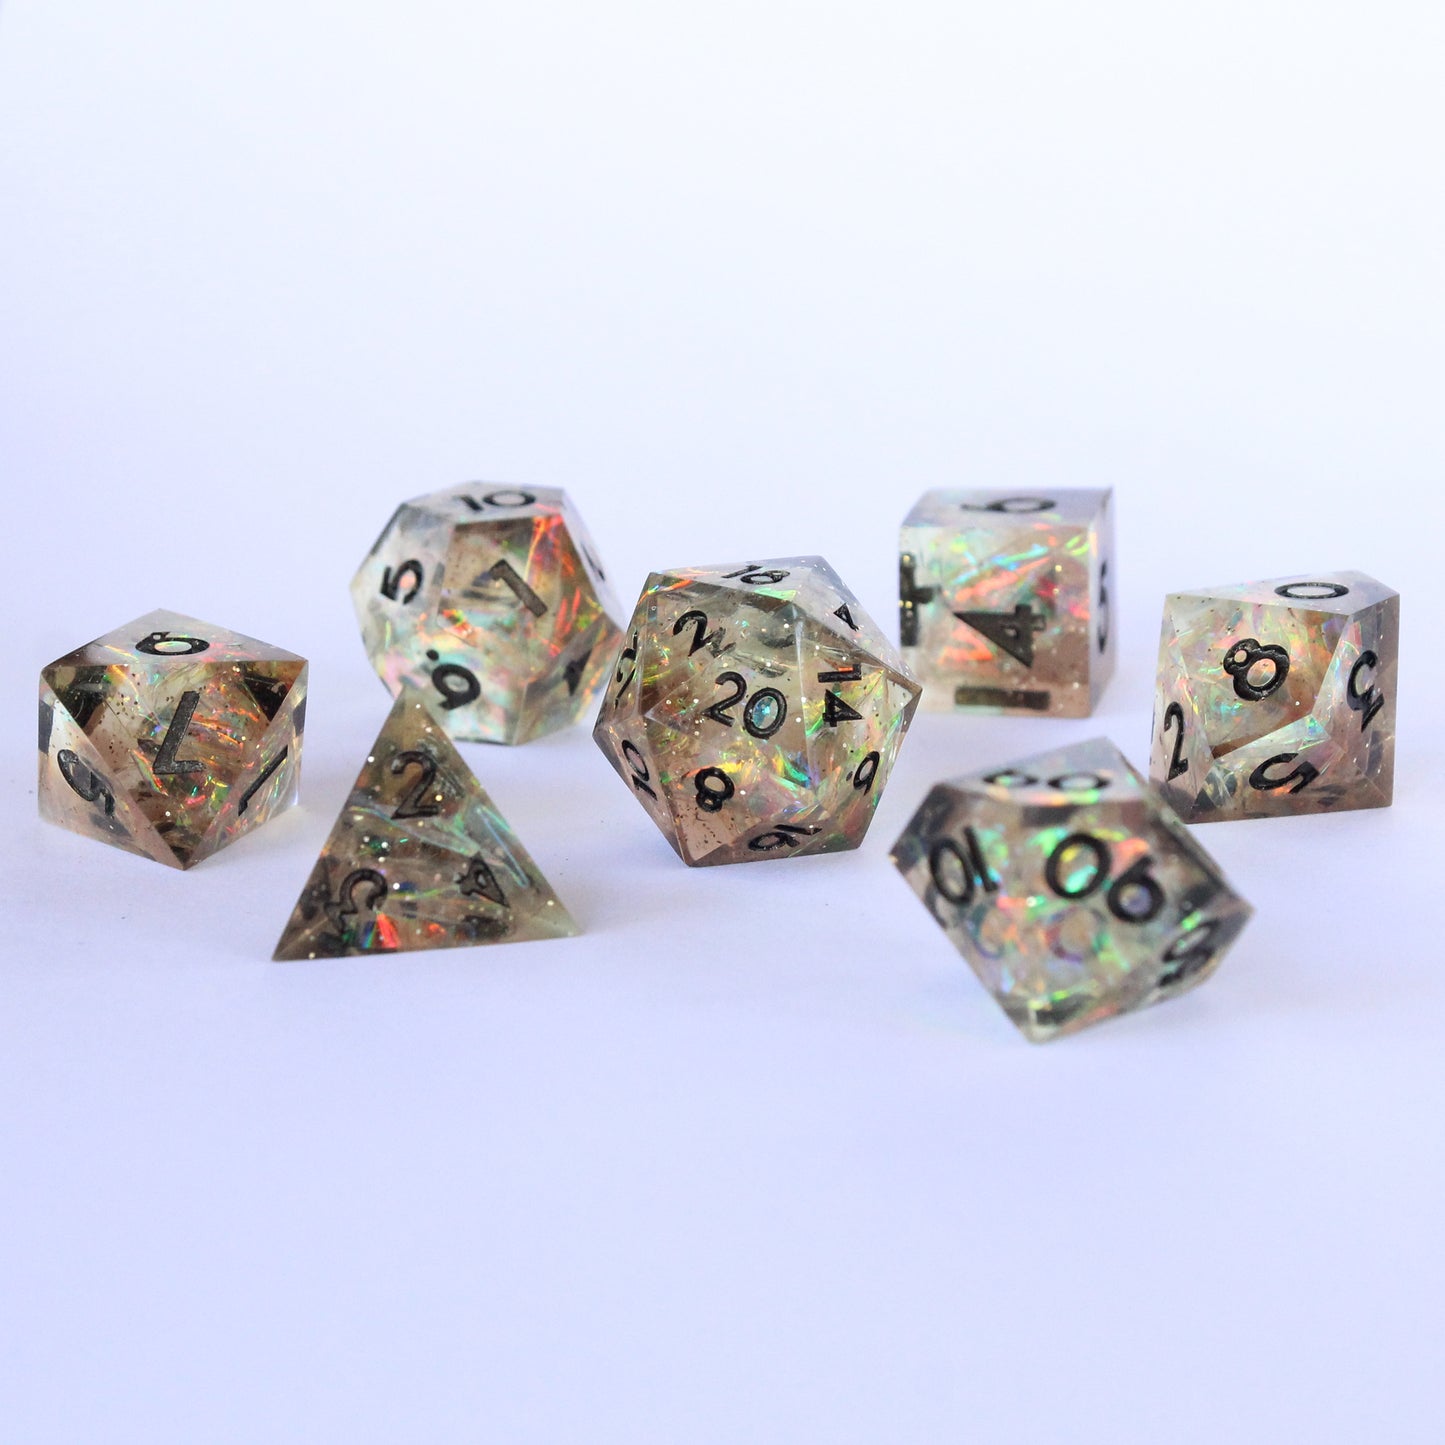 Space Dandy "Light" - 7-piece Polyhedral Dice Set